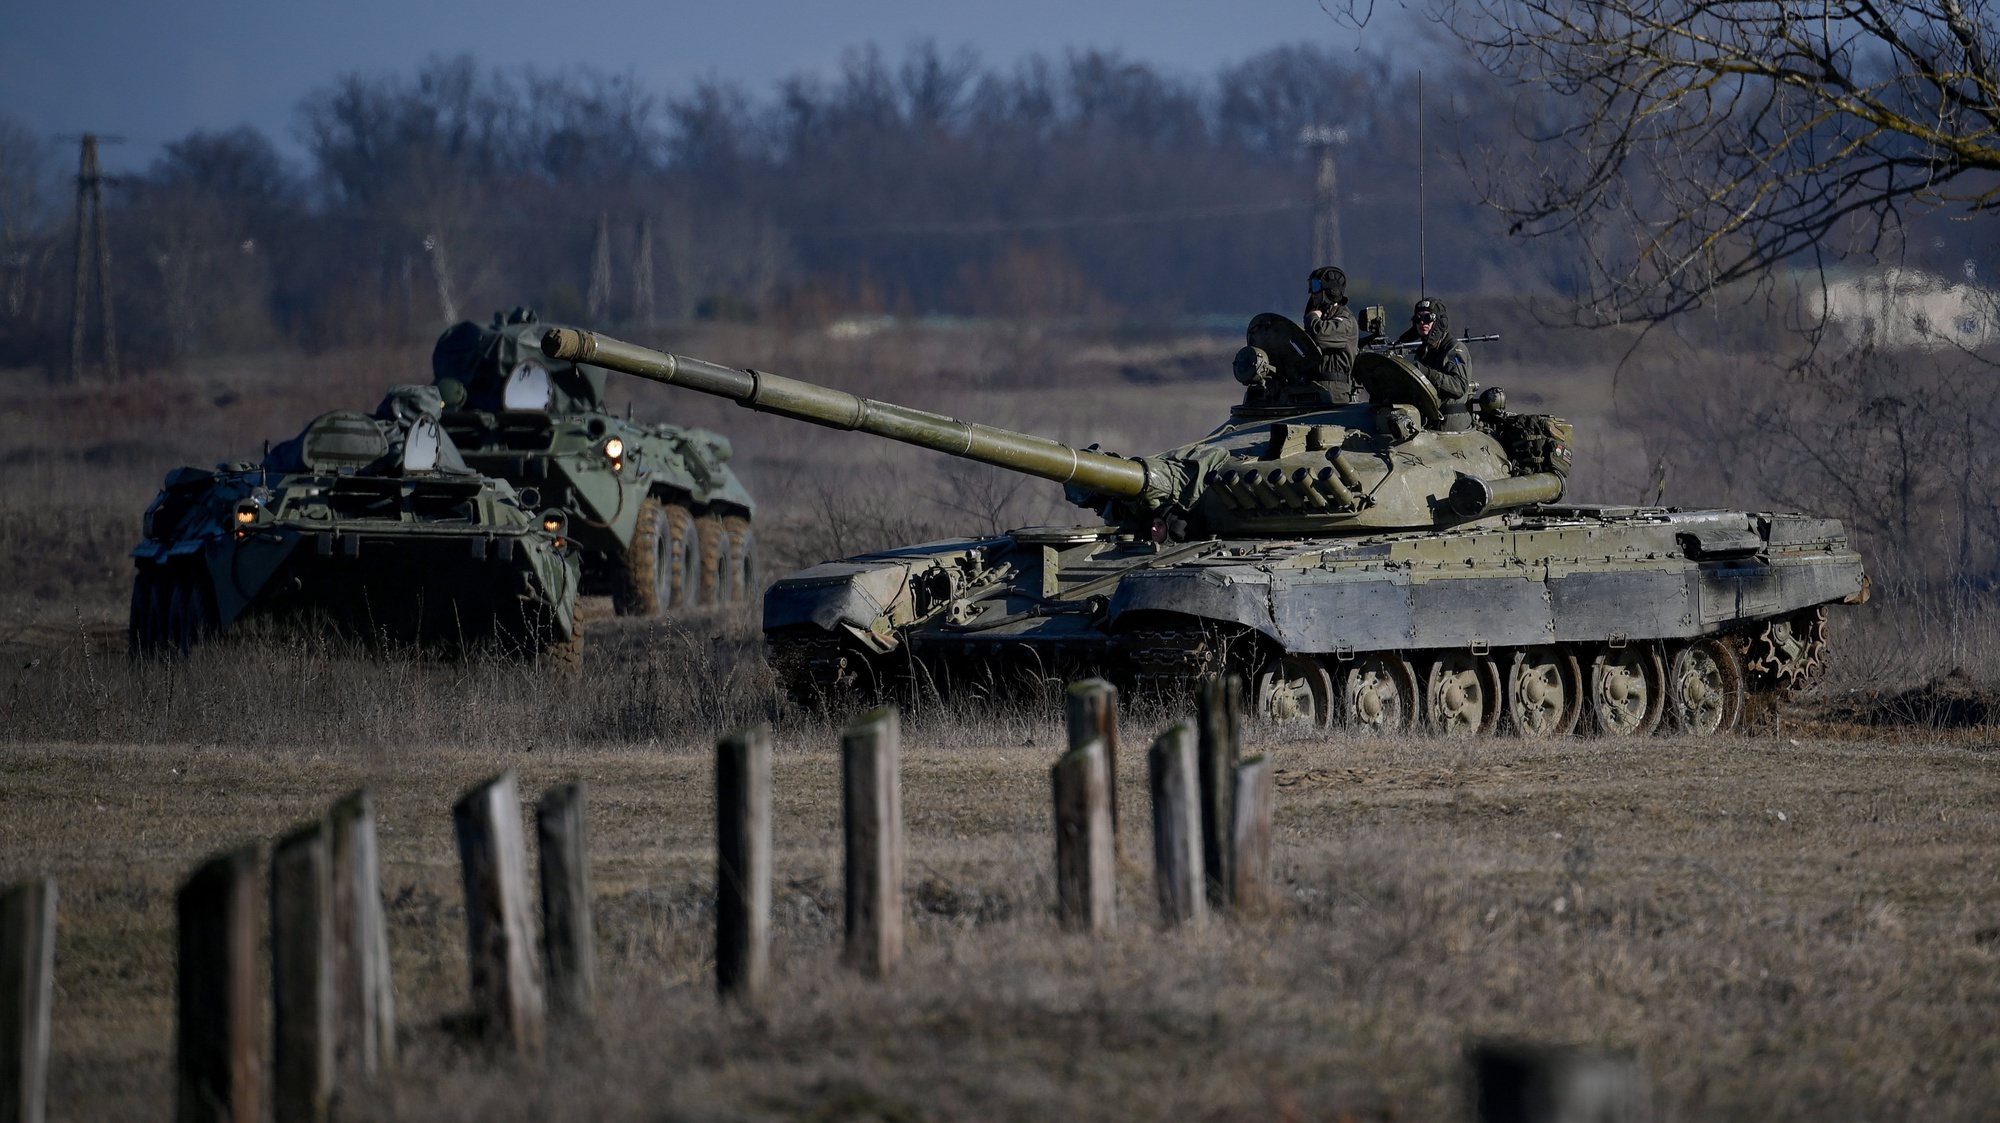 epa09782310 A T-72 battle tank and an armoured vehicle are seen at the Vay Adam training ground near Hajduhadhaz, Hungary 24 February 2022. Hungarian troops are being deployed to the eastern part of the country near the Ukrainian border both for national security reasons and humanitarian aid after Russian troops launched a major military operation on Ukraine on 24 February.  EPA/Zsolt Czegledi HUNGARY OUT